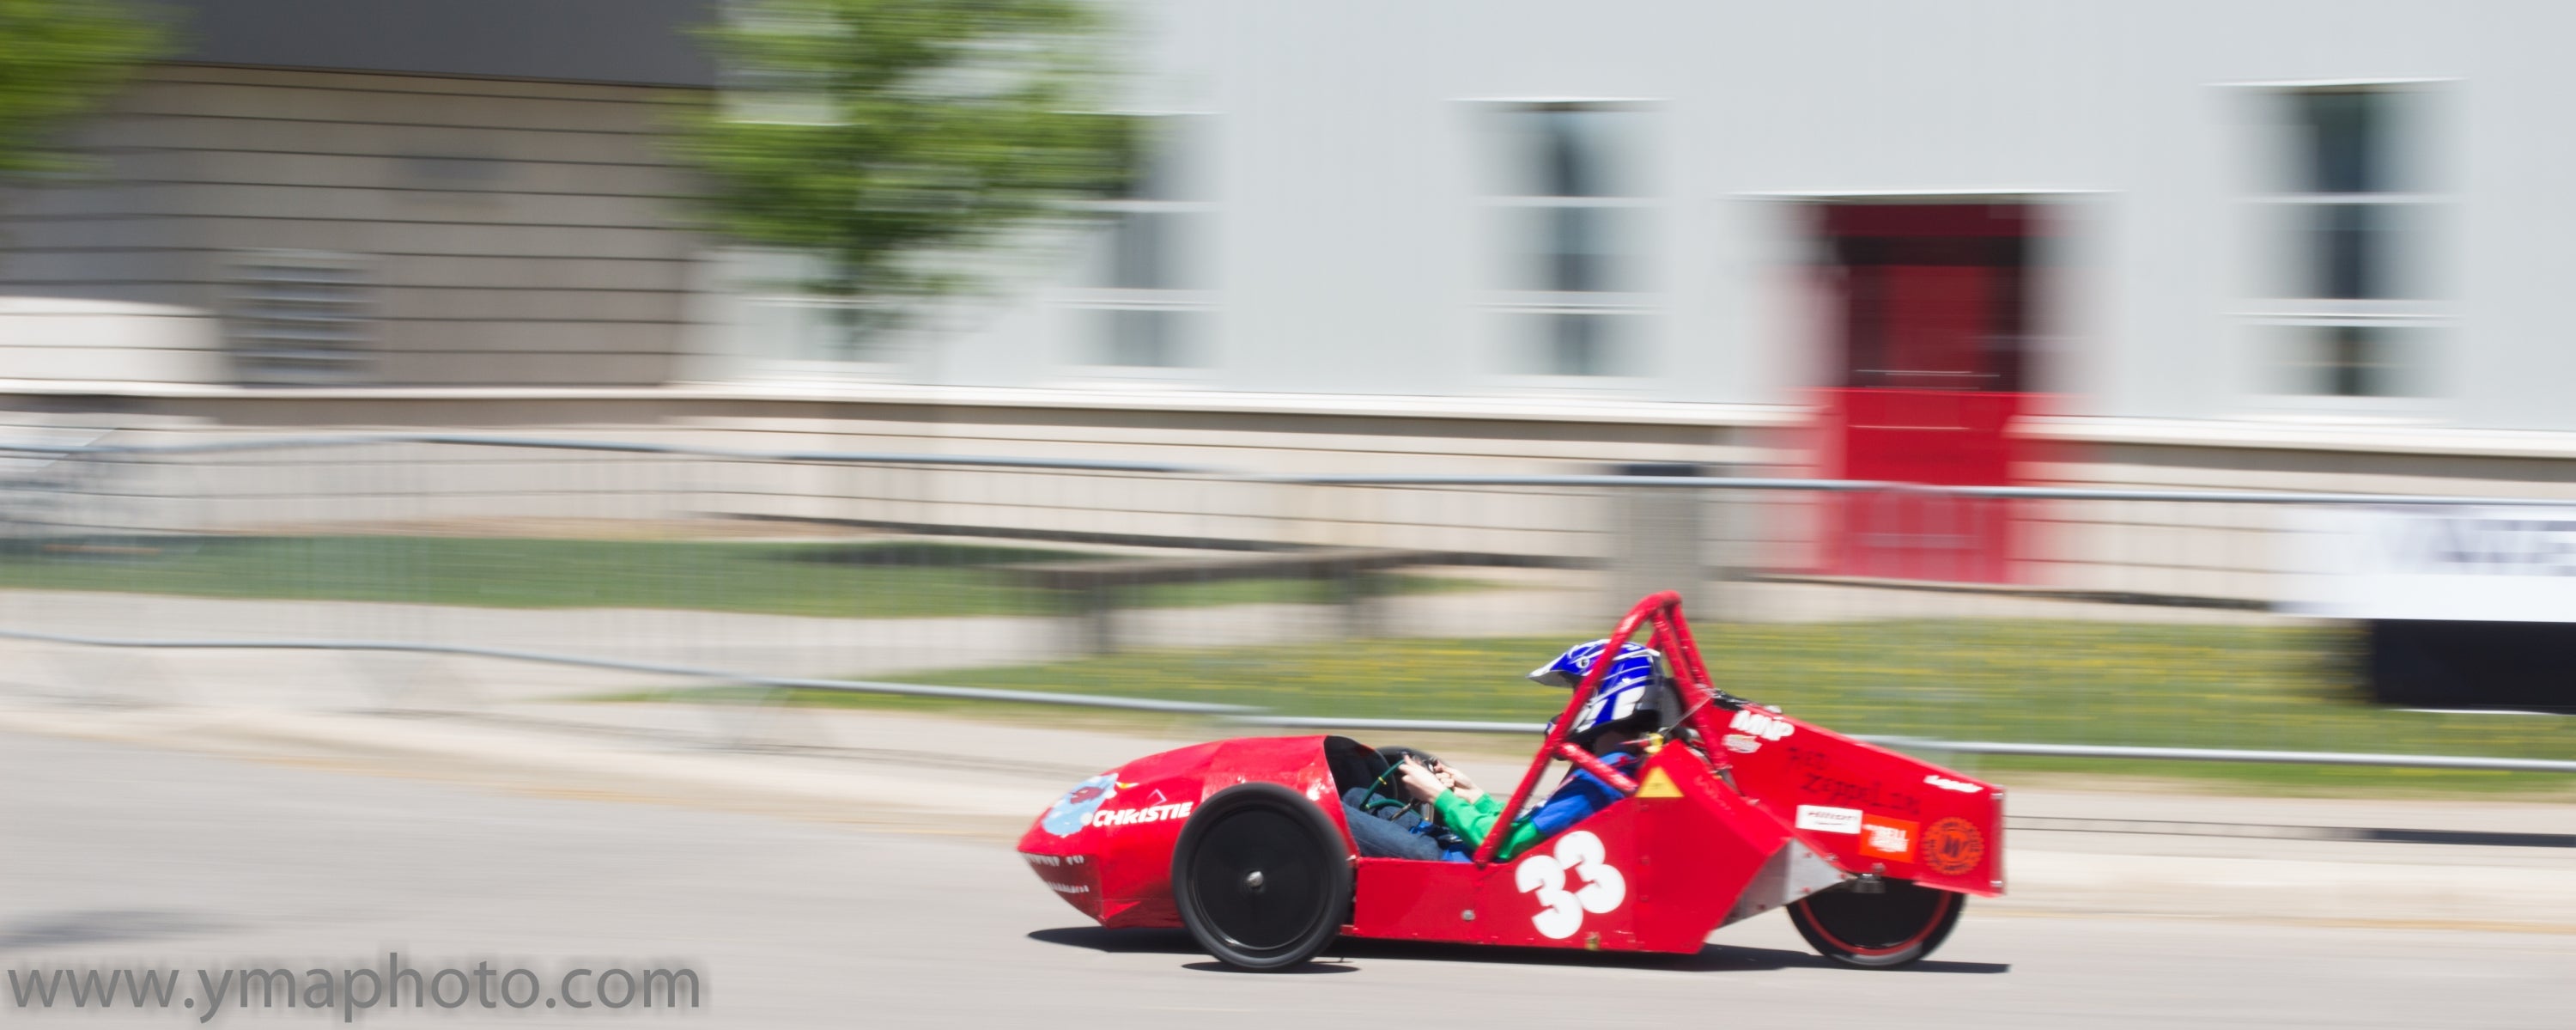 Red electric vehicle on race track